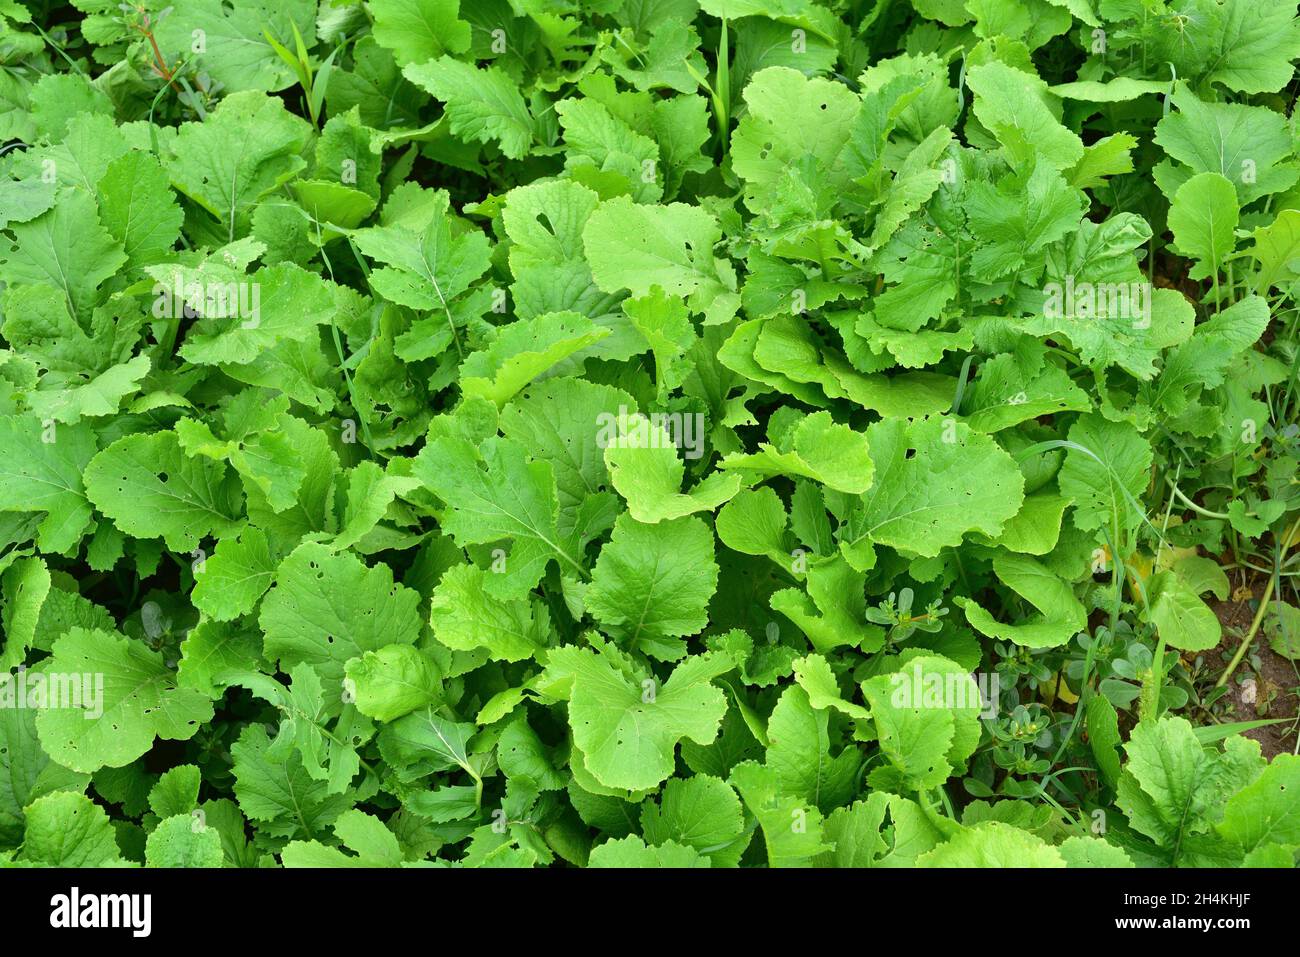 Grelos (Brassica rapa rapifera) is an edible plant cultivated for its edible leaves. This photo was taken in Baix Llobregat, Barcelona, Catalonia, Stock Photo